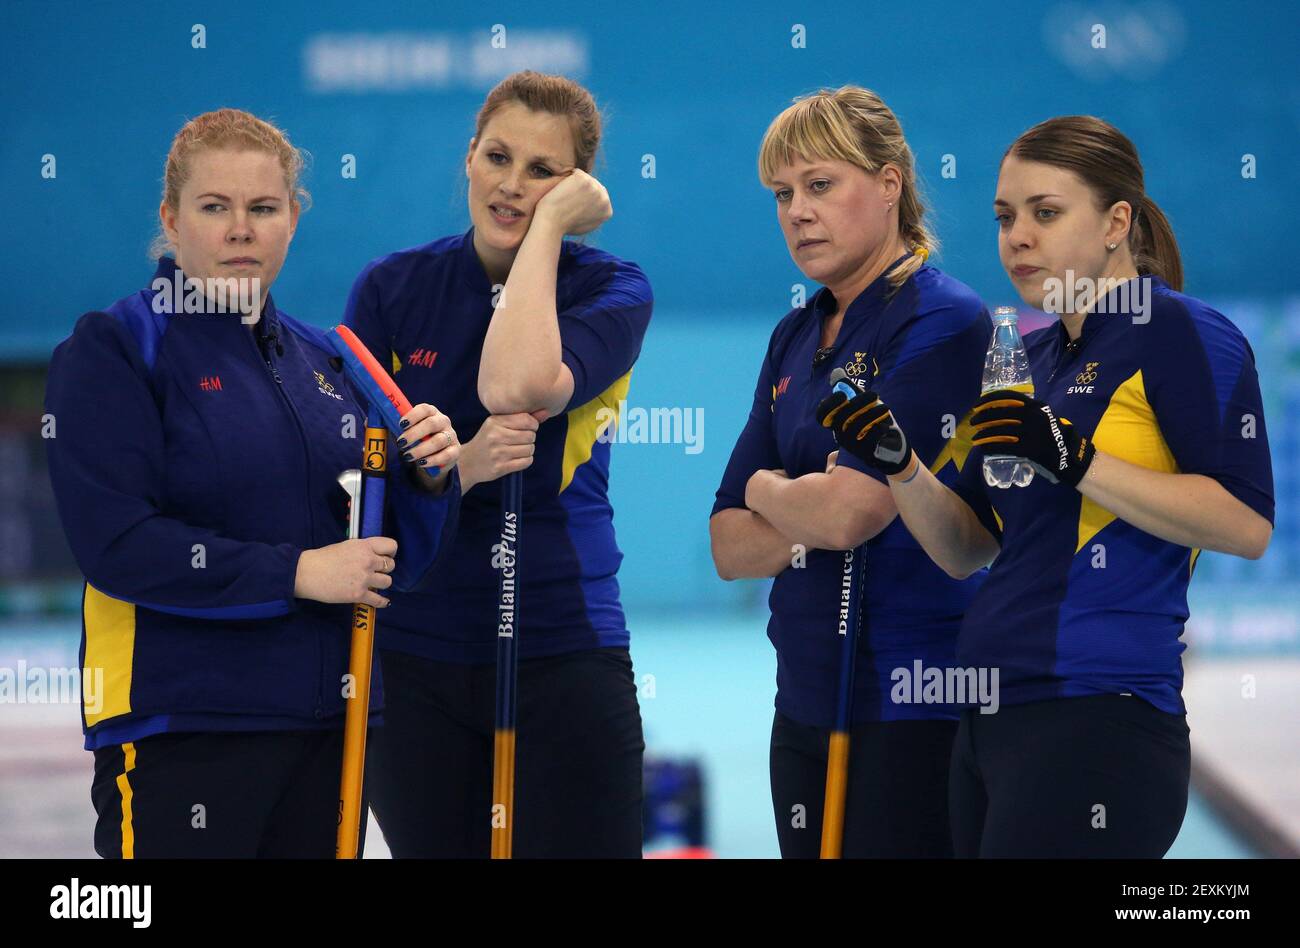 Sweden's Margaretha Sigfridsson (left to right), Christina Bertrup, Maria Prytz and Maria Wennerstroem look on during a women's curling semifinal against Switzerland at the Ice Cube Curling Center during the Winter Olympics in Sochi, Russia, Wednesday, Feb. 19, 2014. (Photo by Brian Cassella/Chicago Tribune/MCT/Sipa USA) Stock Photo